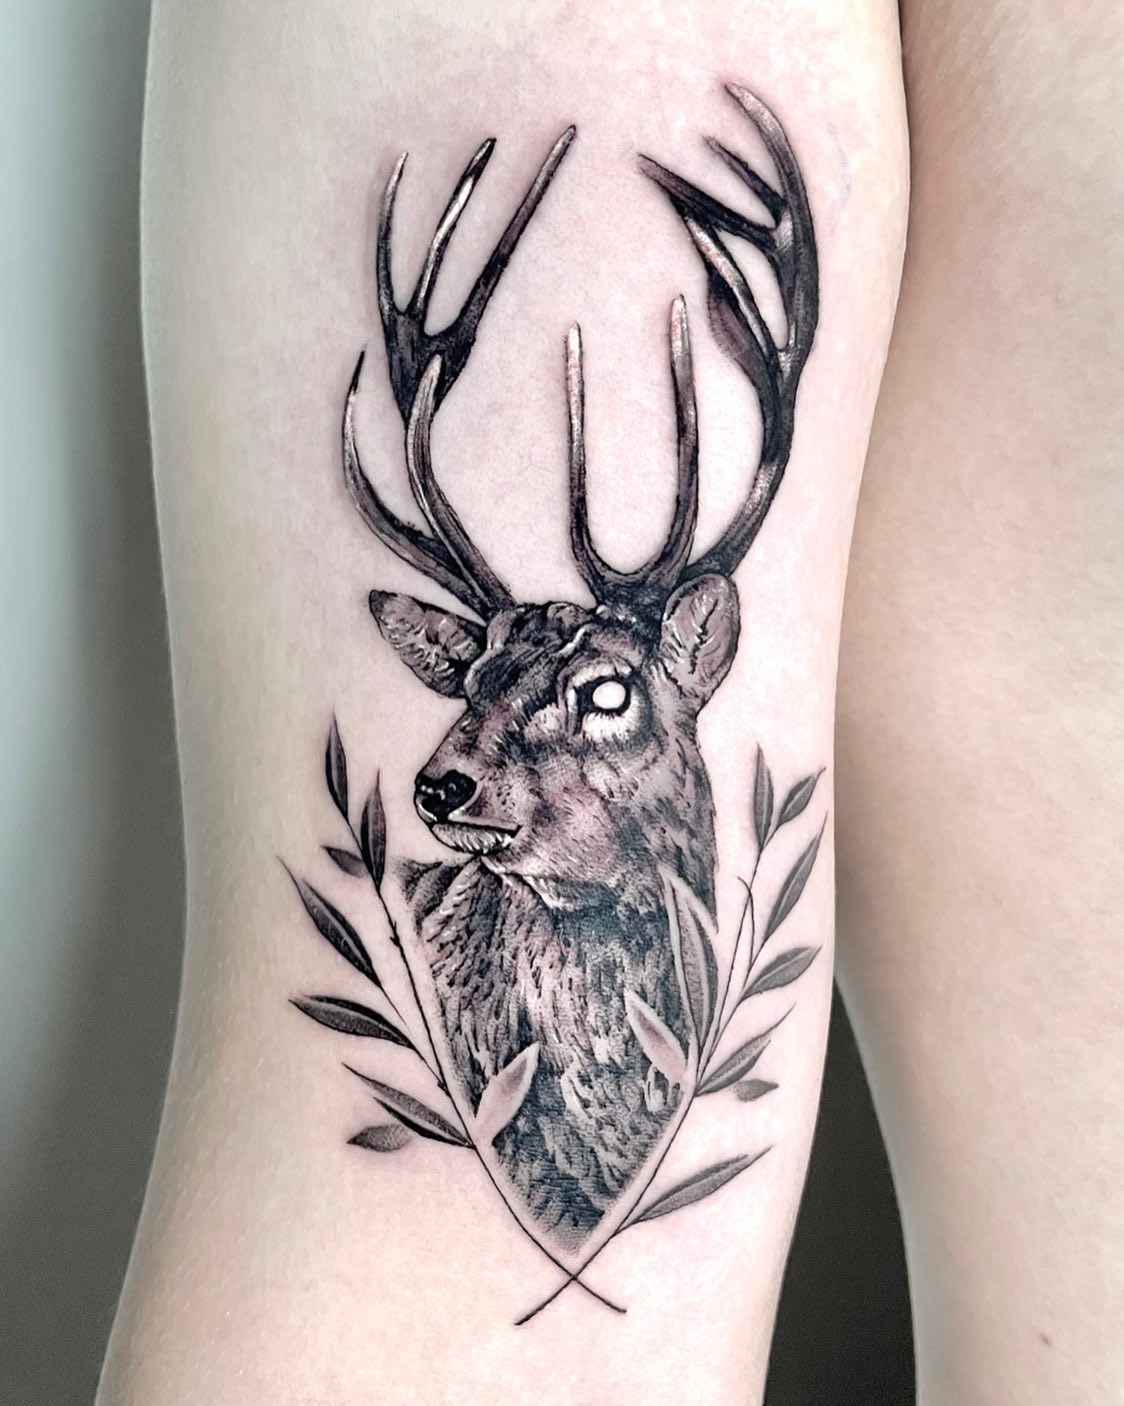 Deers are amazing animals with their amazing horns. Getting a tattoo of this animal will help you show your love to everyone. Plus, two leaves covering it will take your tattoo to a different level.